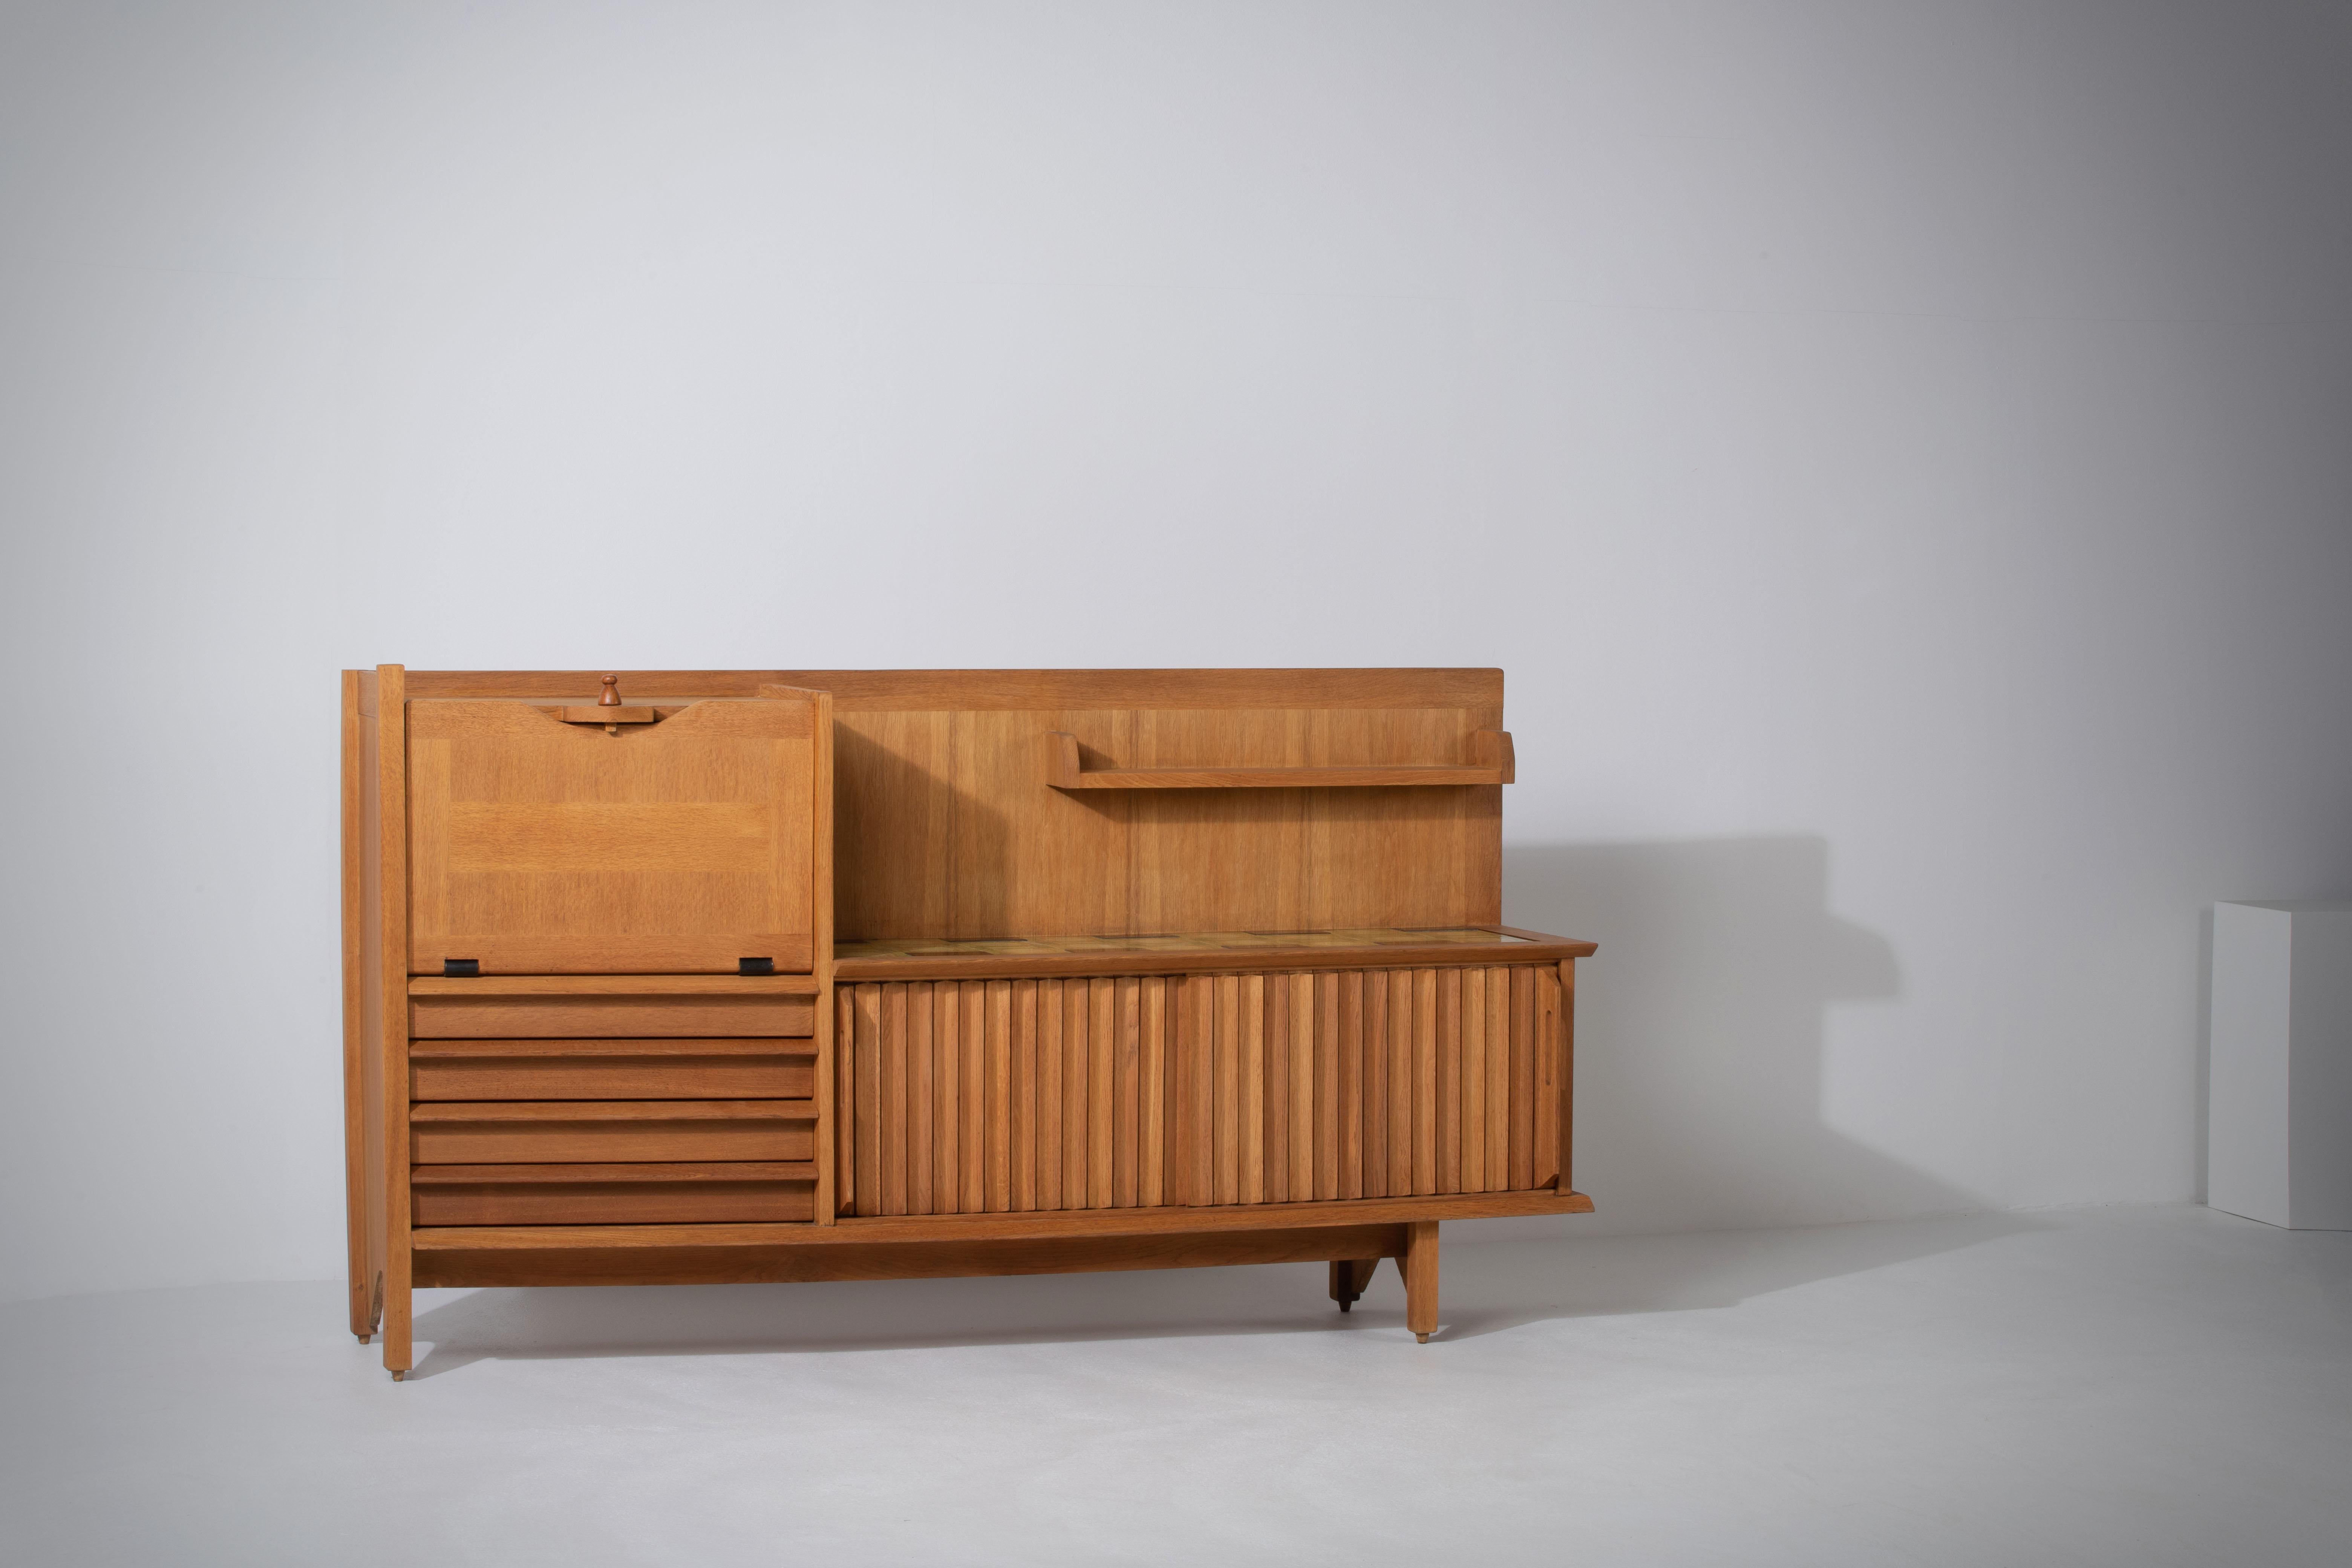 This characteristic cabinet, buffet in solid oak is designed by the French designer duo Jacques Chambron (1914-2001) and Robert Guillerme (1913-1990). It features two sliding front doors, one pullout door on the left side and four drawers that